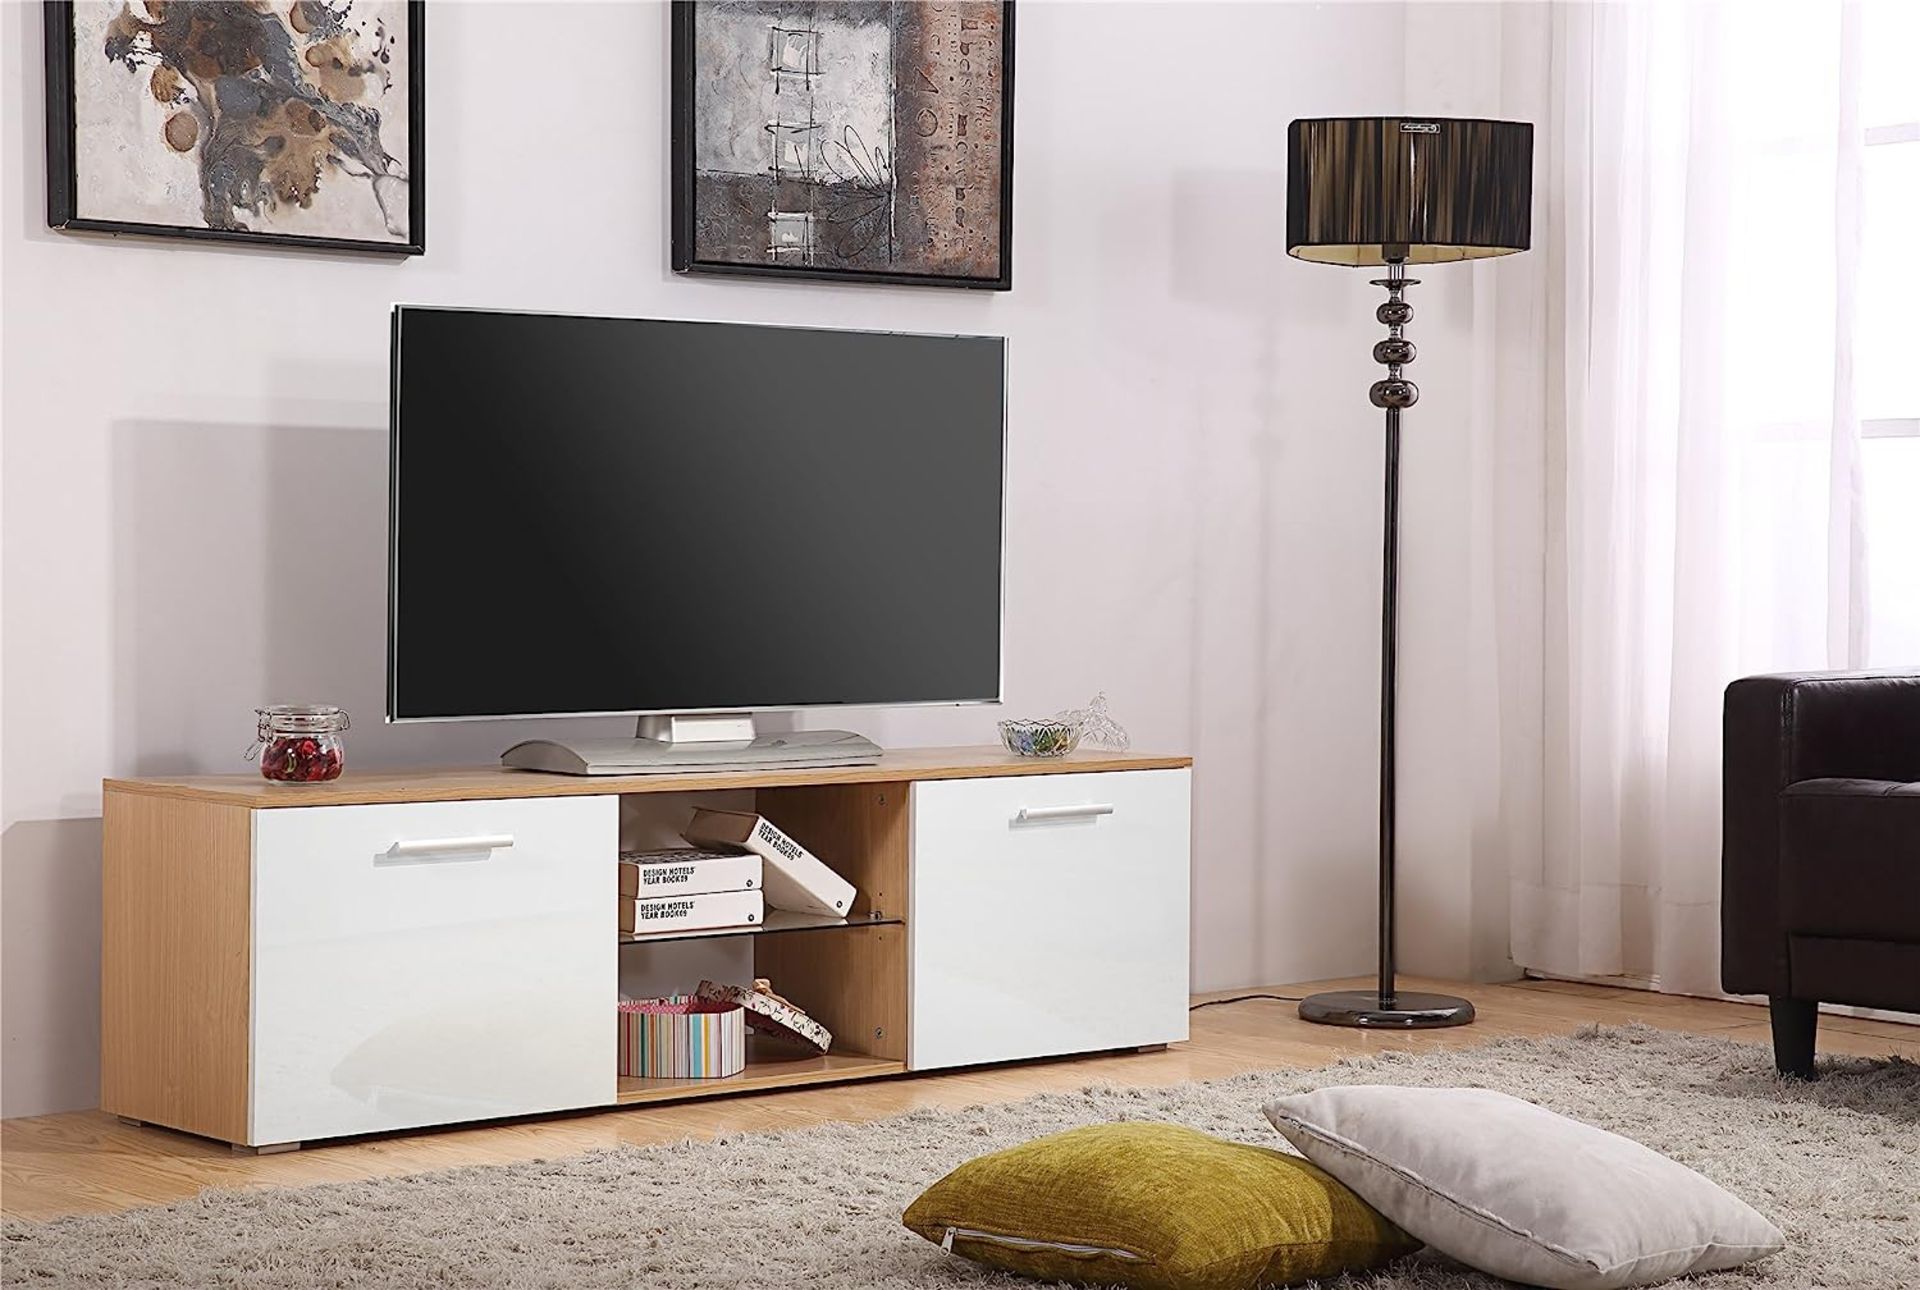 BRAND NEW HARMIN MODERN 160CM TV STAND CABINET UNIT WITH HIGH GLOSS DOORS (WHITE ON OAK)